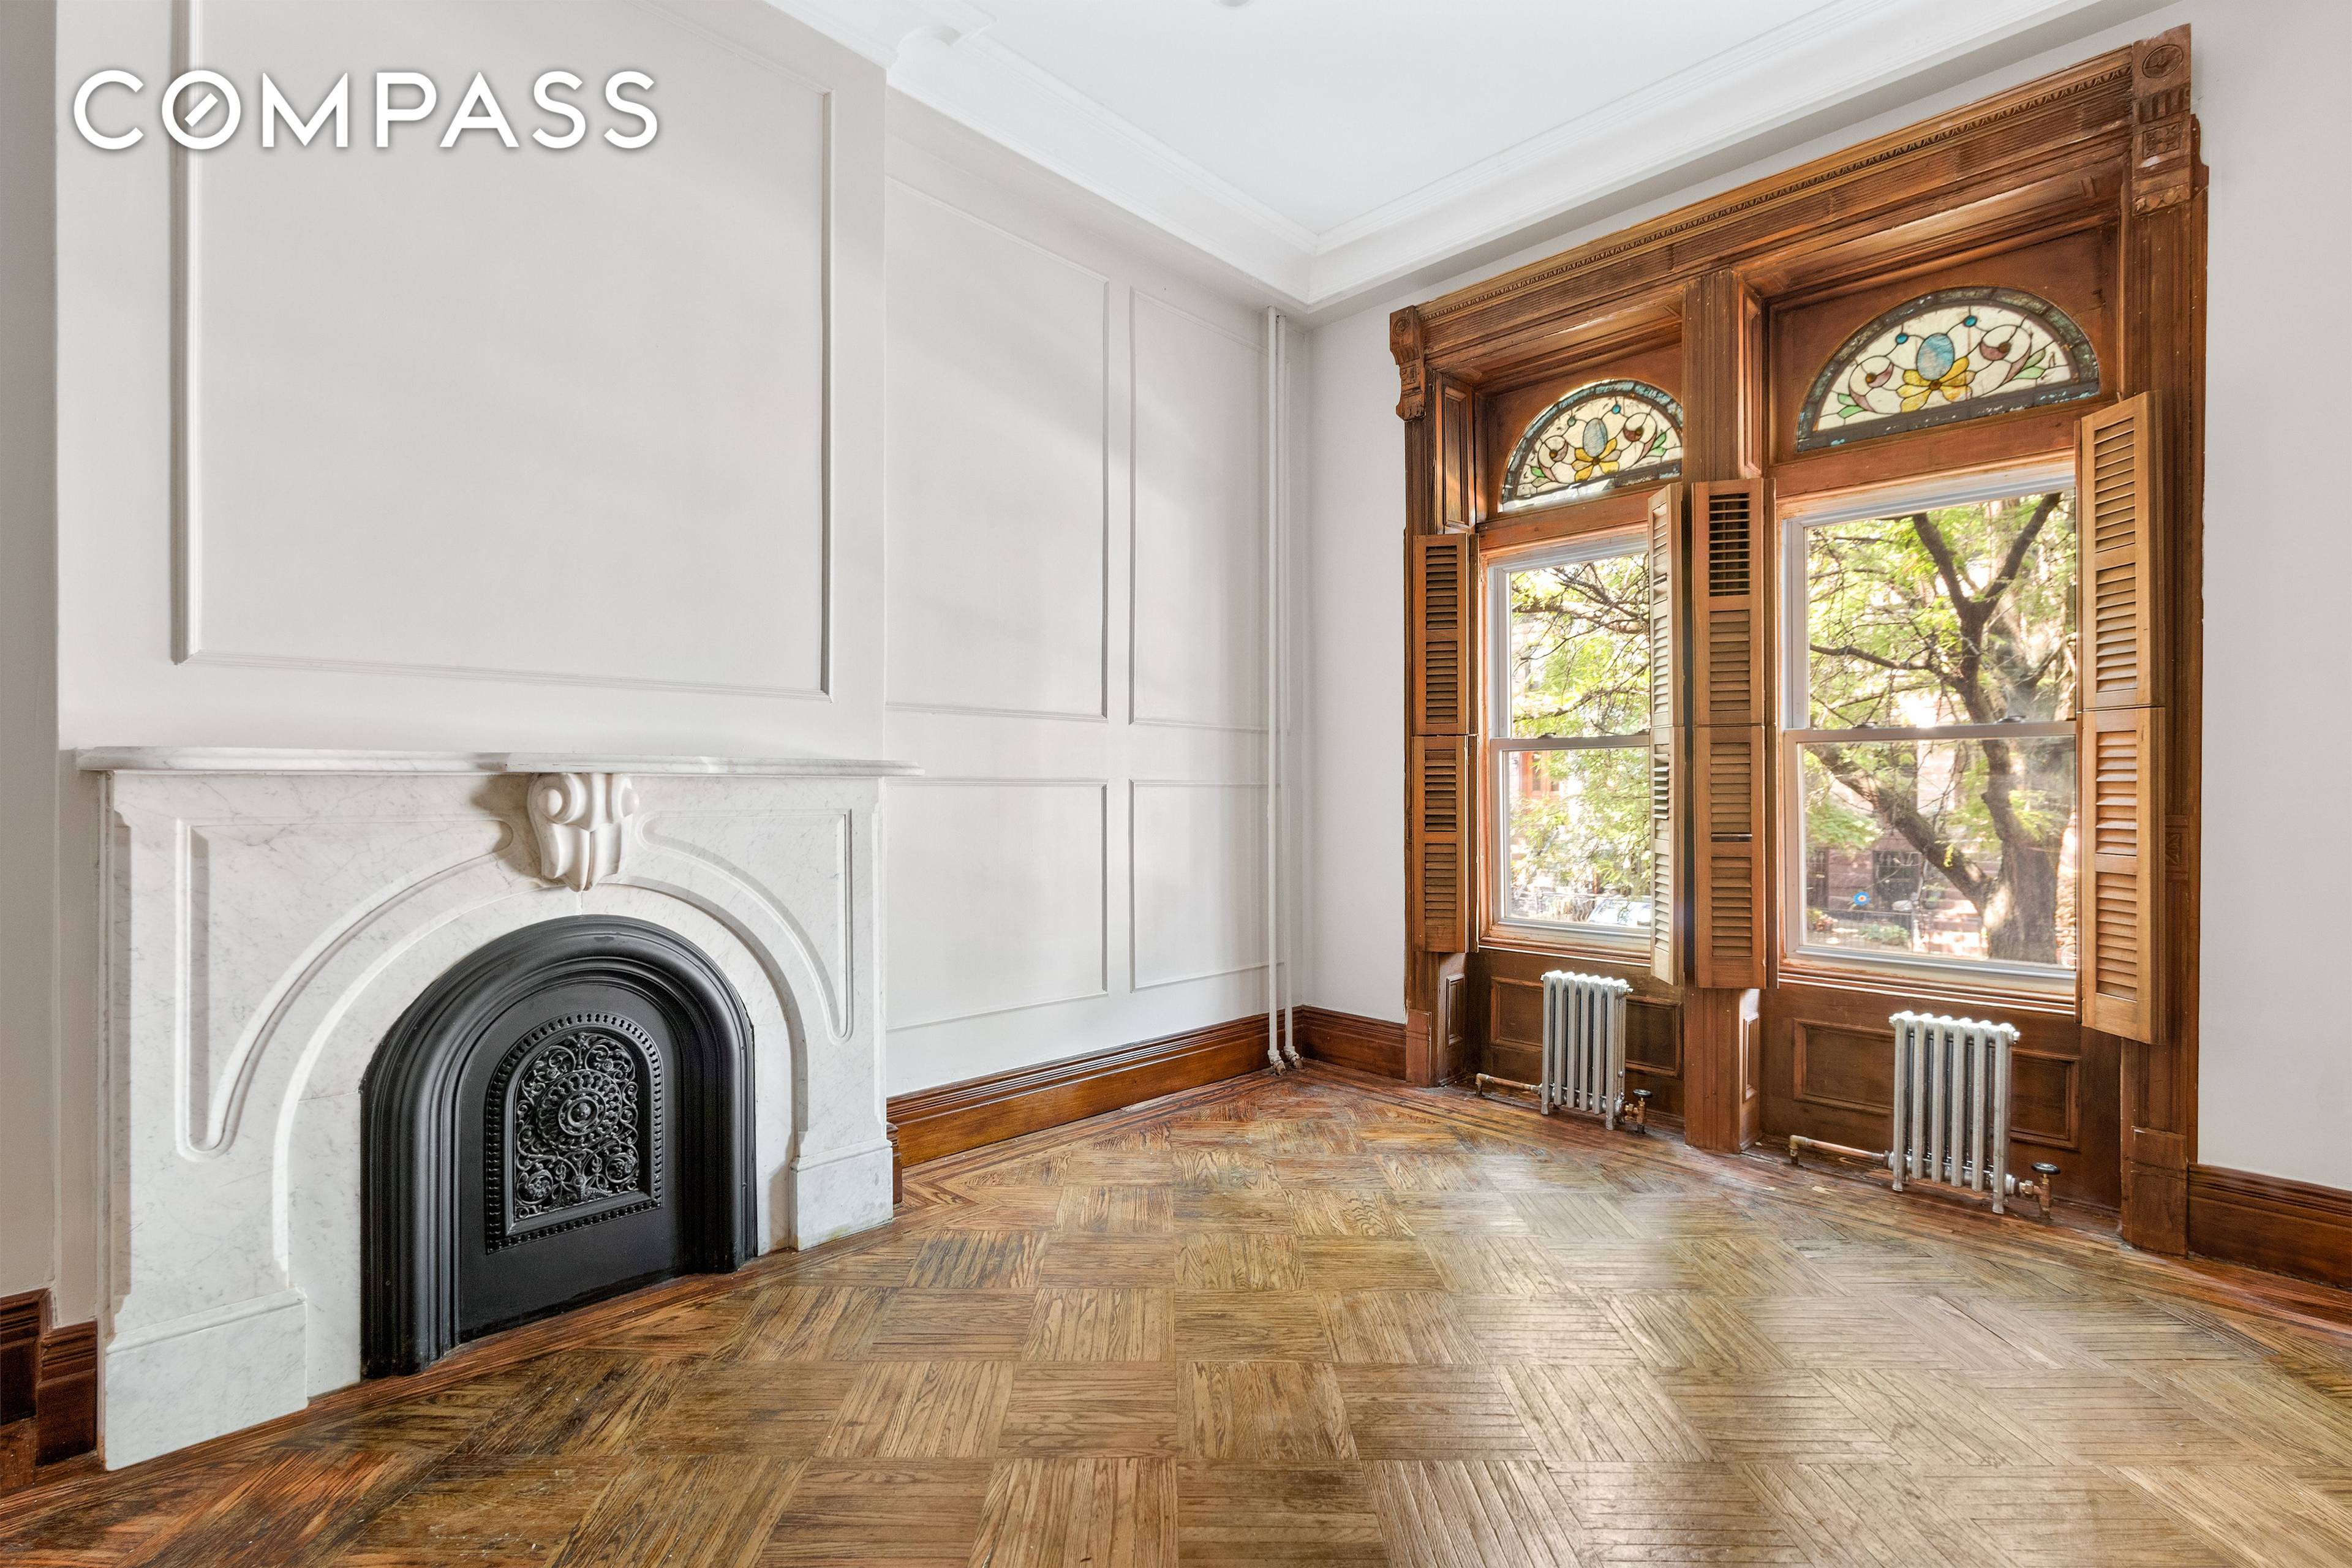 Renovated in a historic brownstone with pre war details preserved and restored.